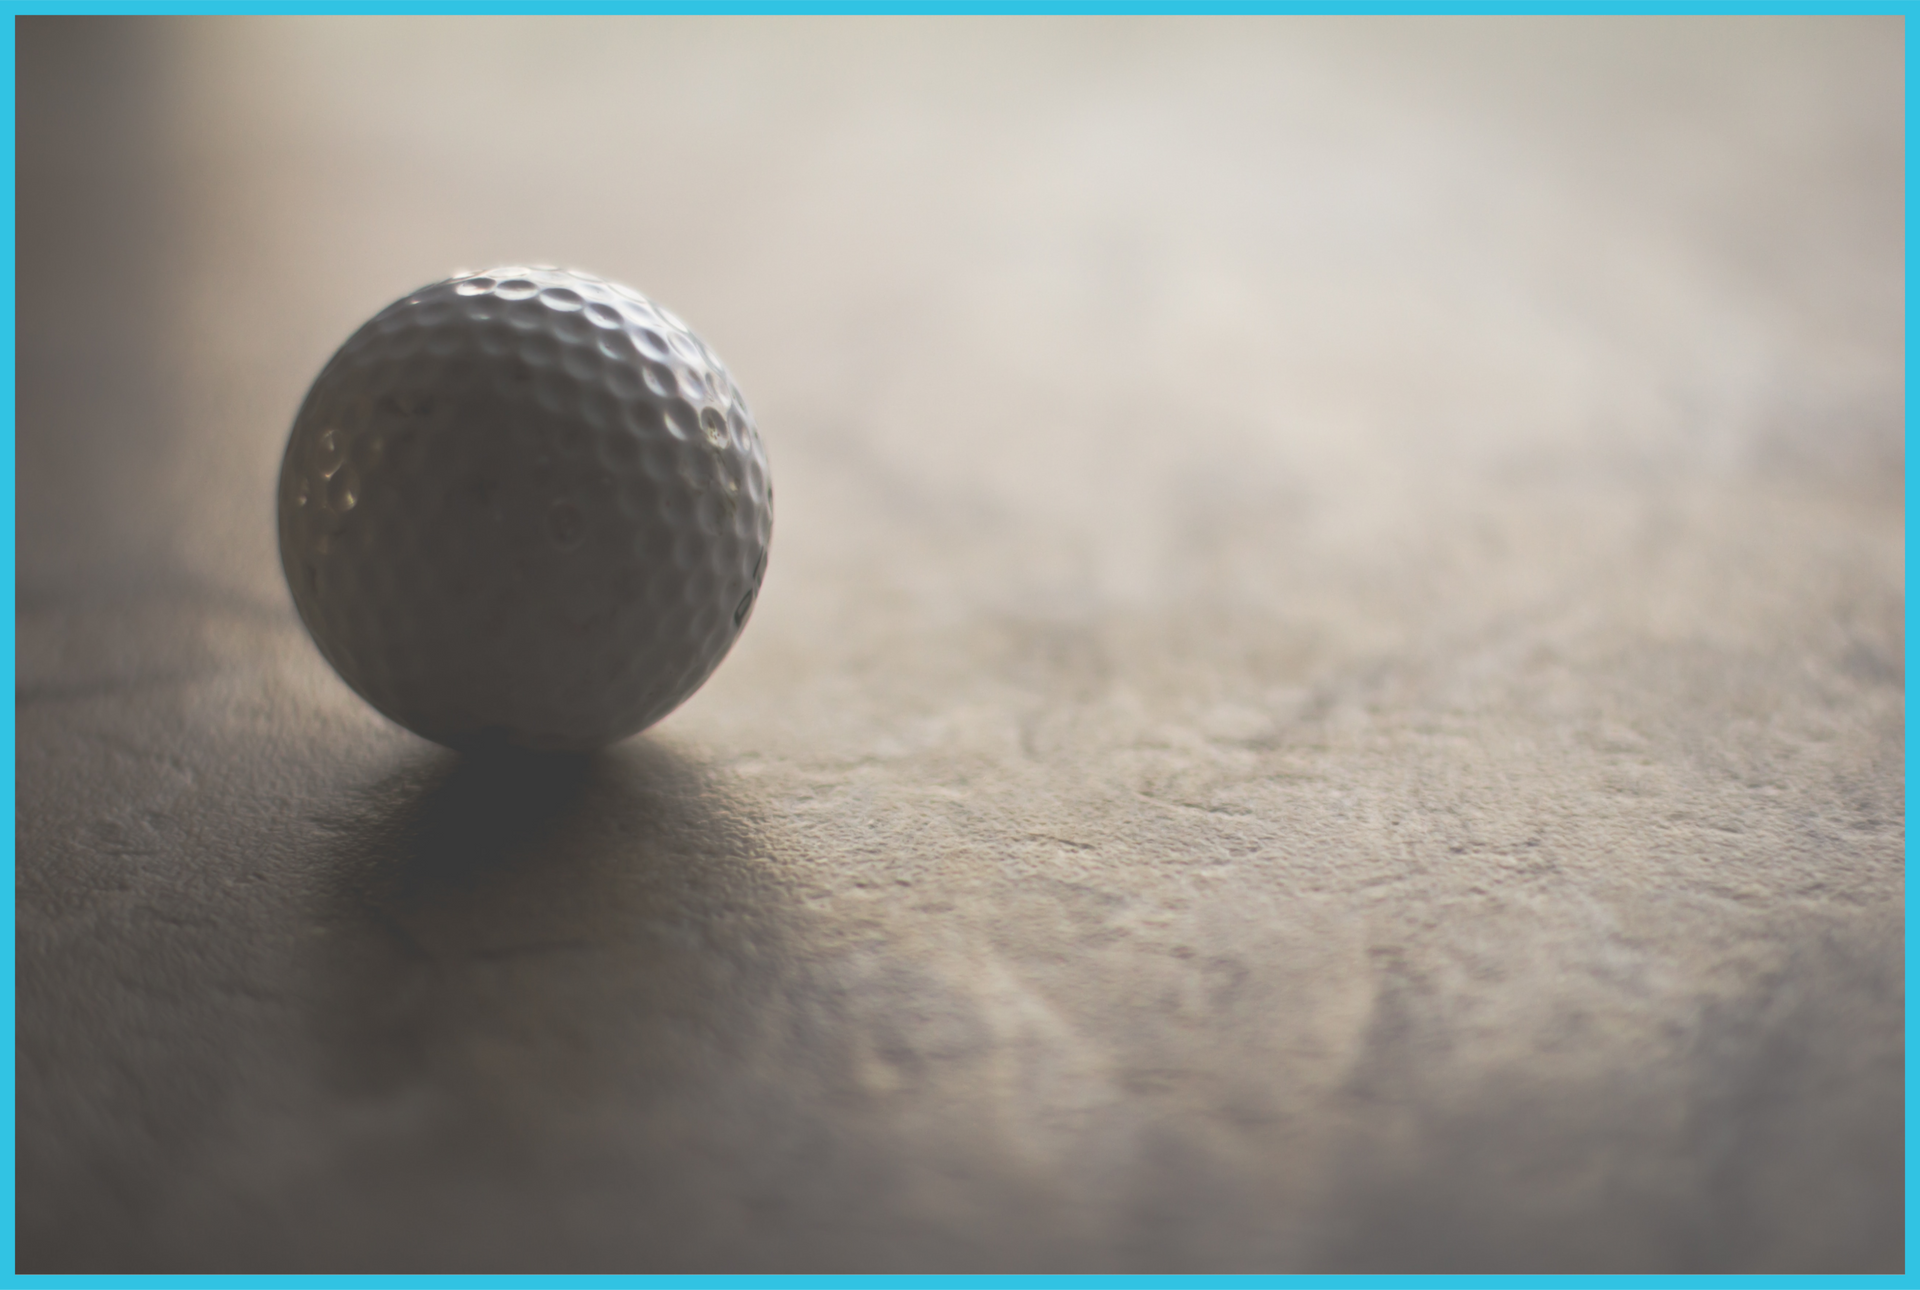 A golf ball is sitting on a concrete surface.